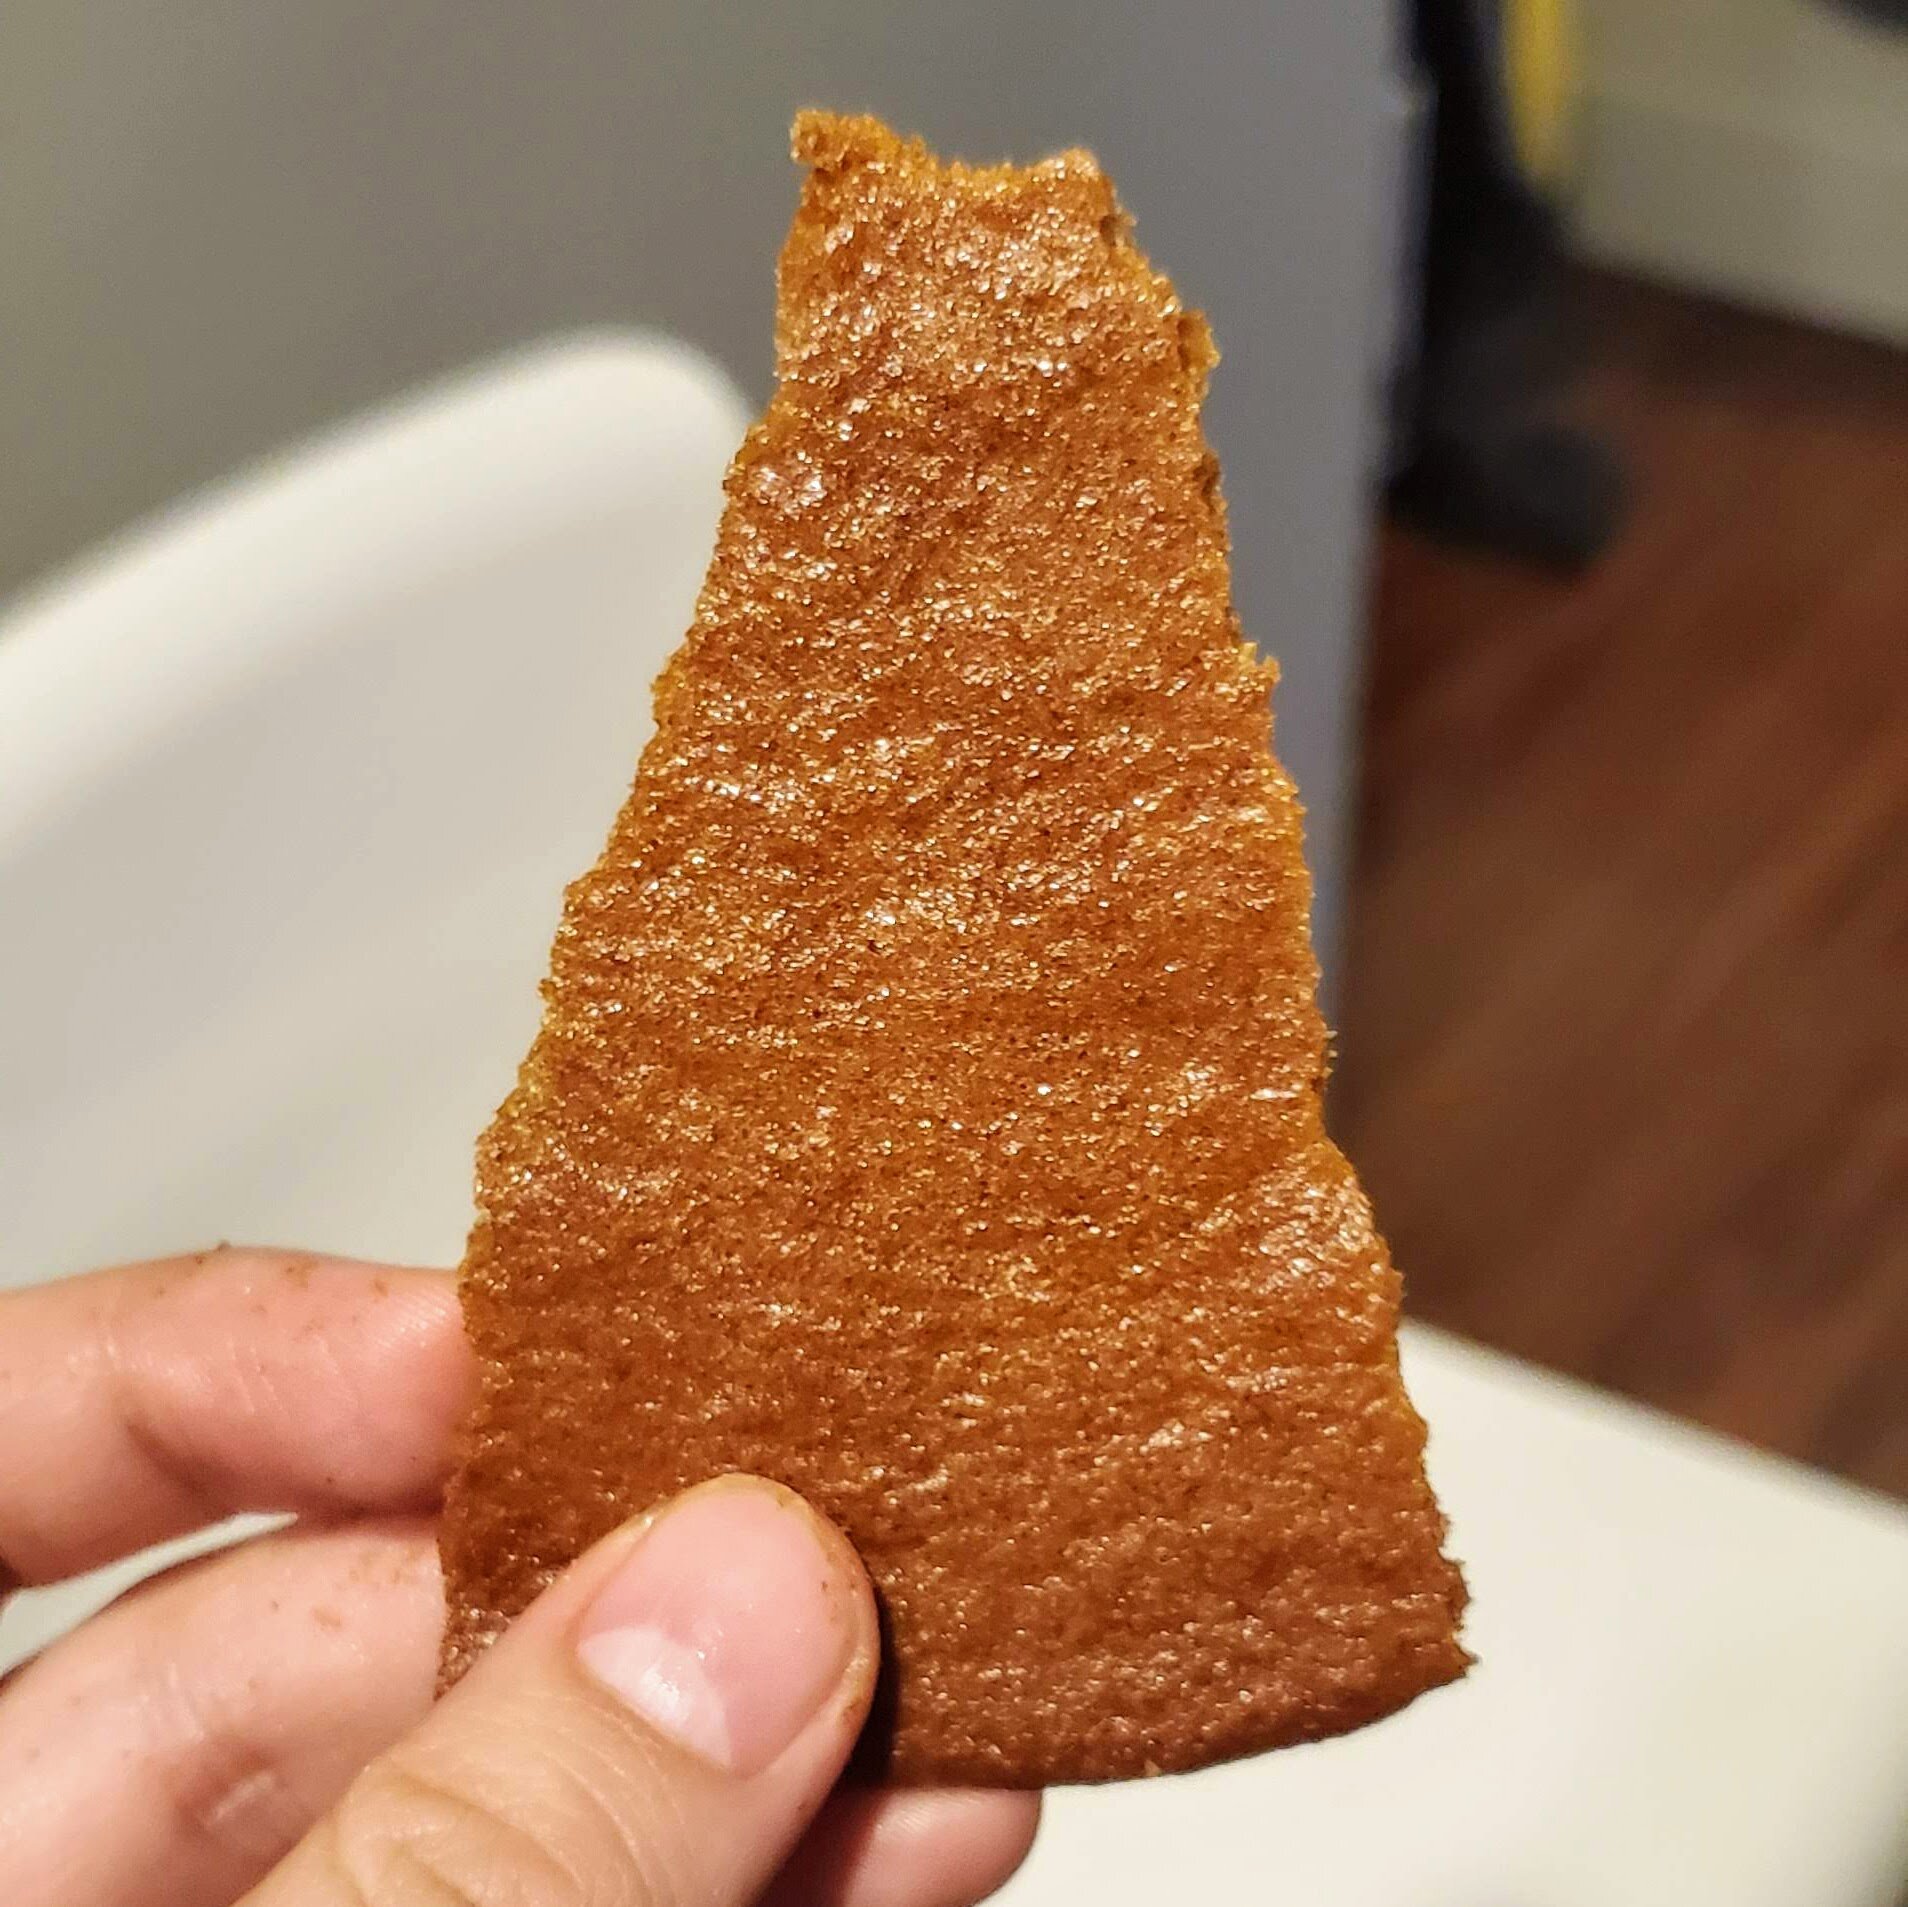 A toasted cracker (for crumbs)